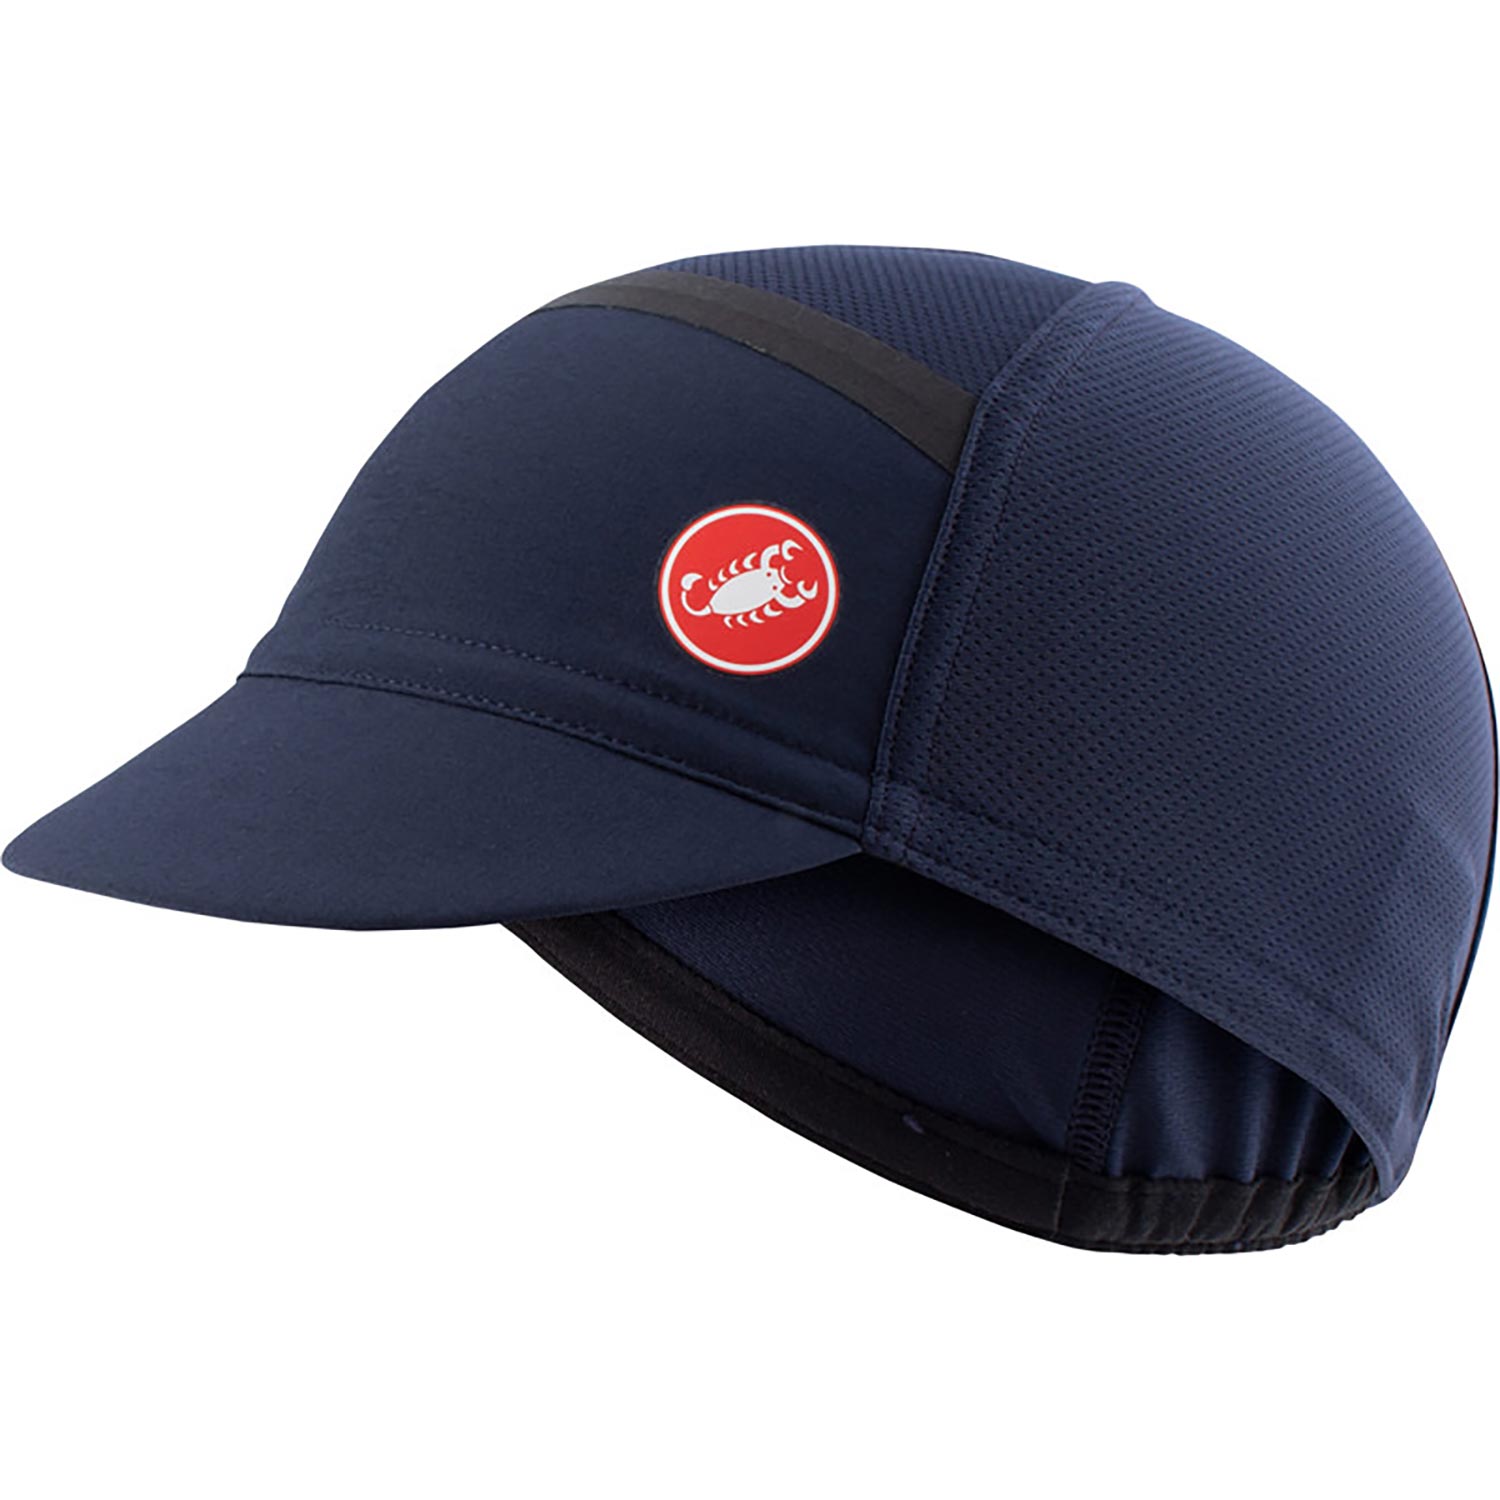 Castelli Ombra Cycling Cap - SS22 | Merlin Cycles